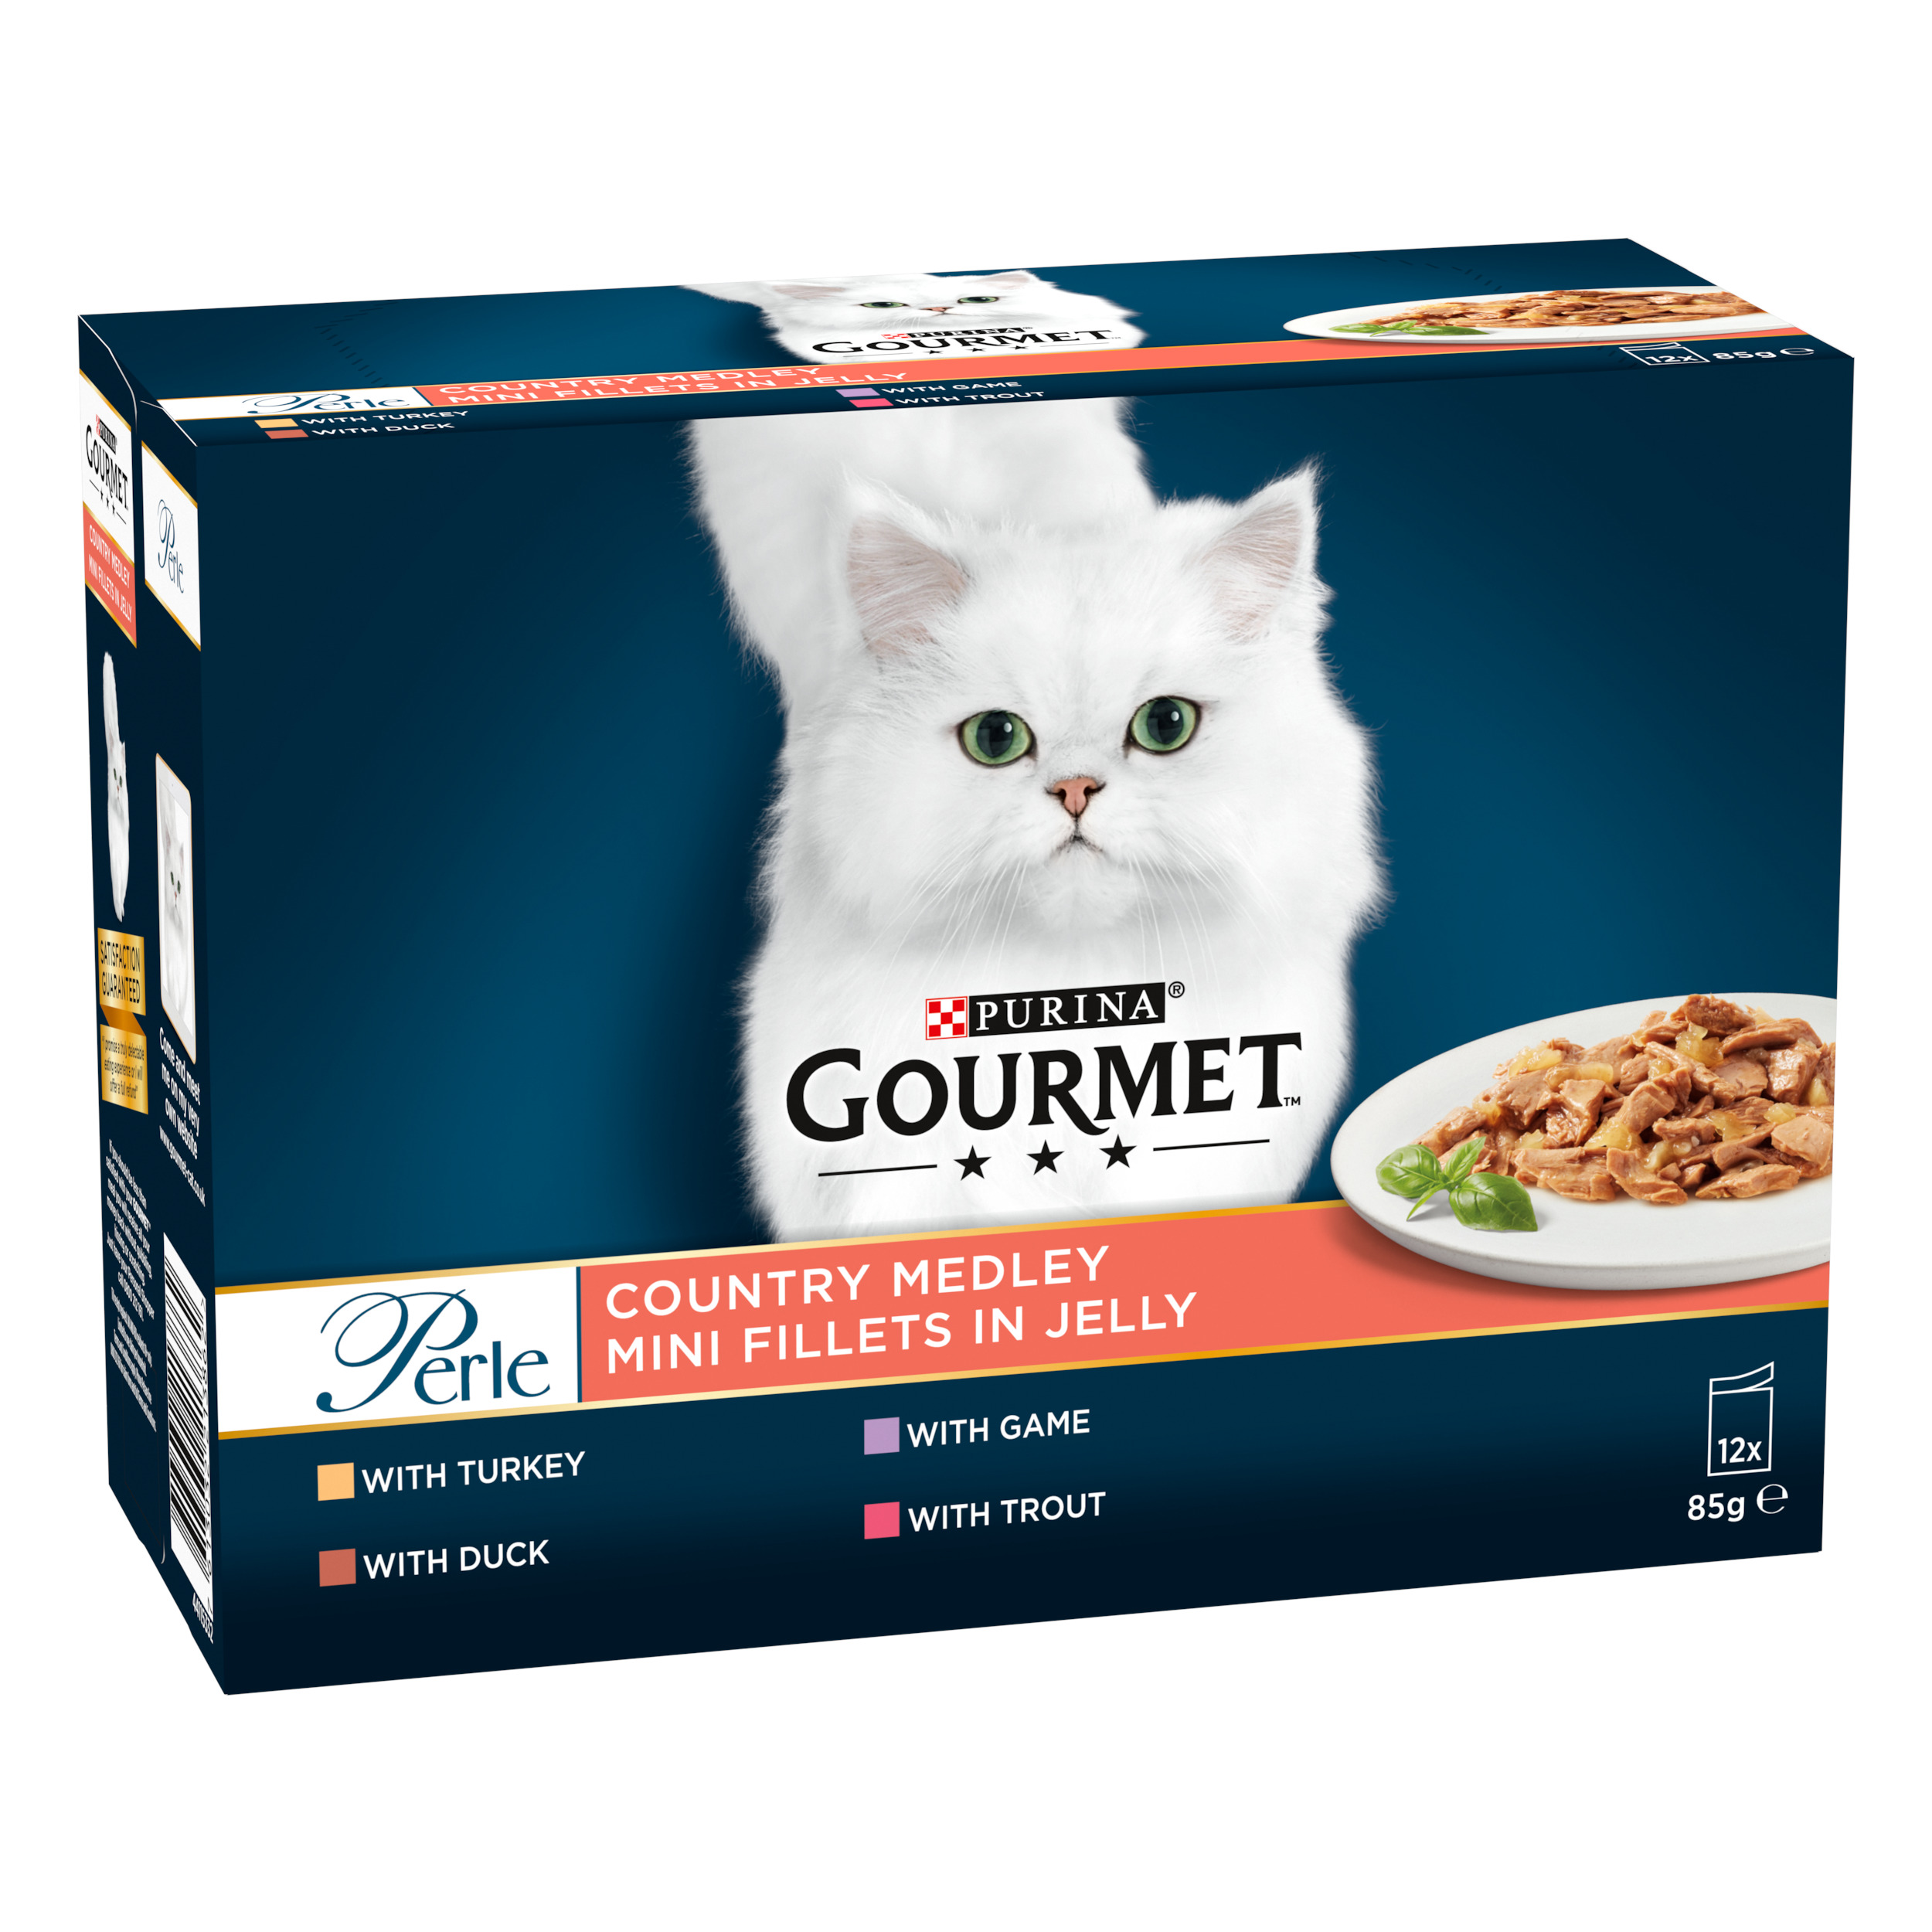 Purina GOURMET® Perle Country Medley Multipack Mini Fillets In Jelly 85g, Pack of 12